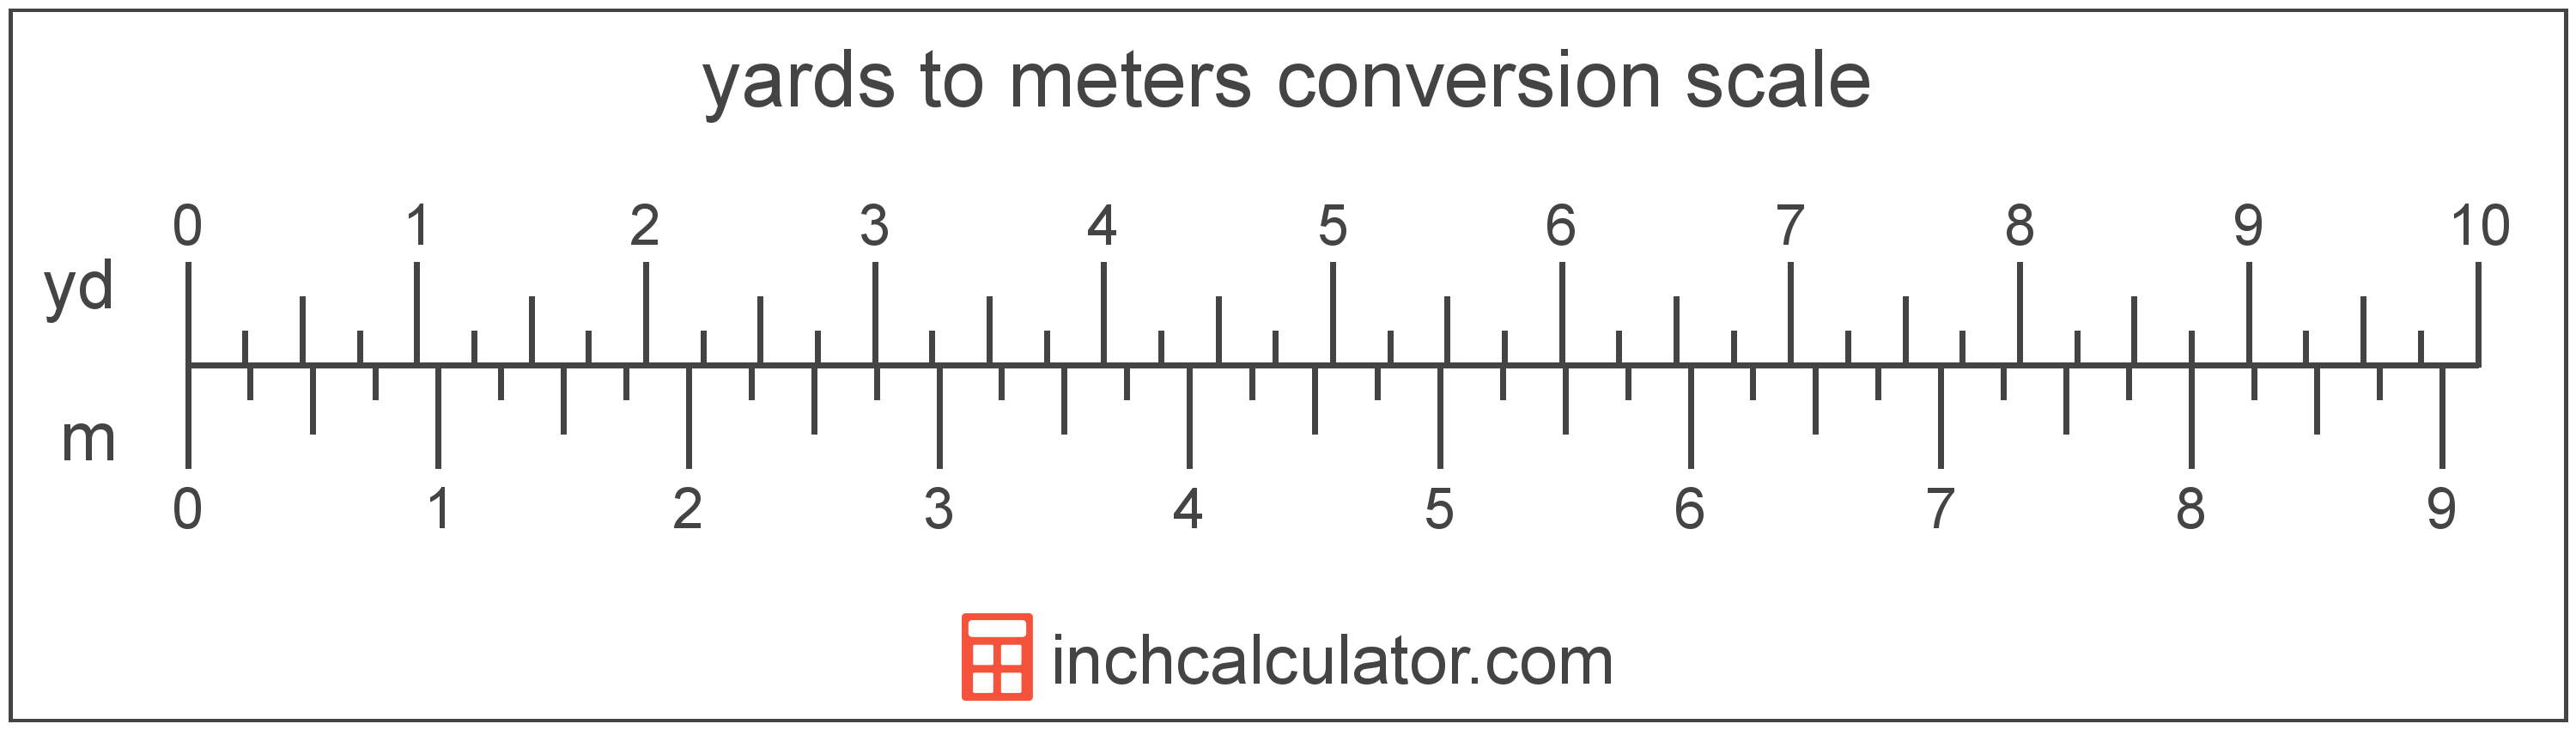 conversion scale showing yards and equivalent meters length values